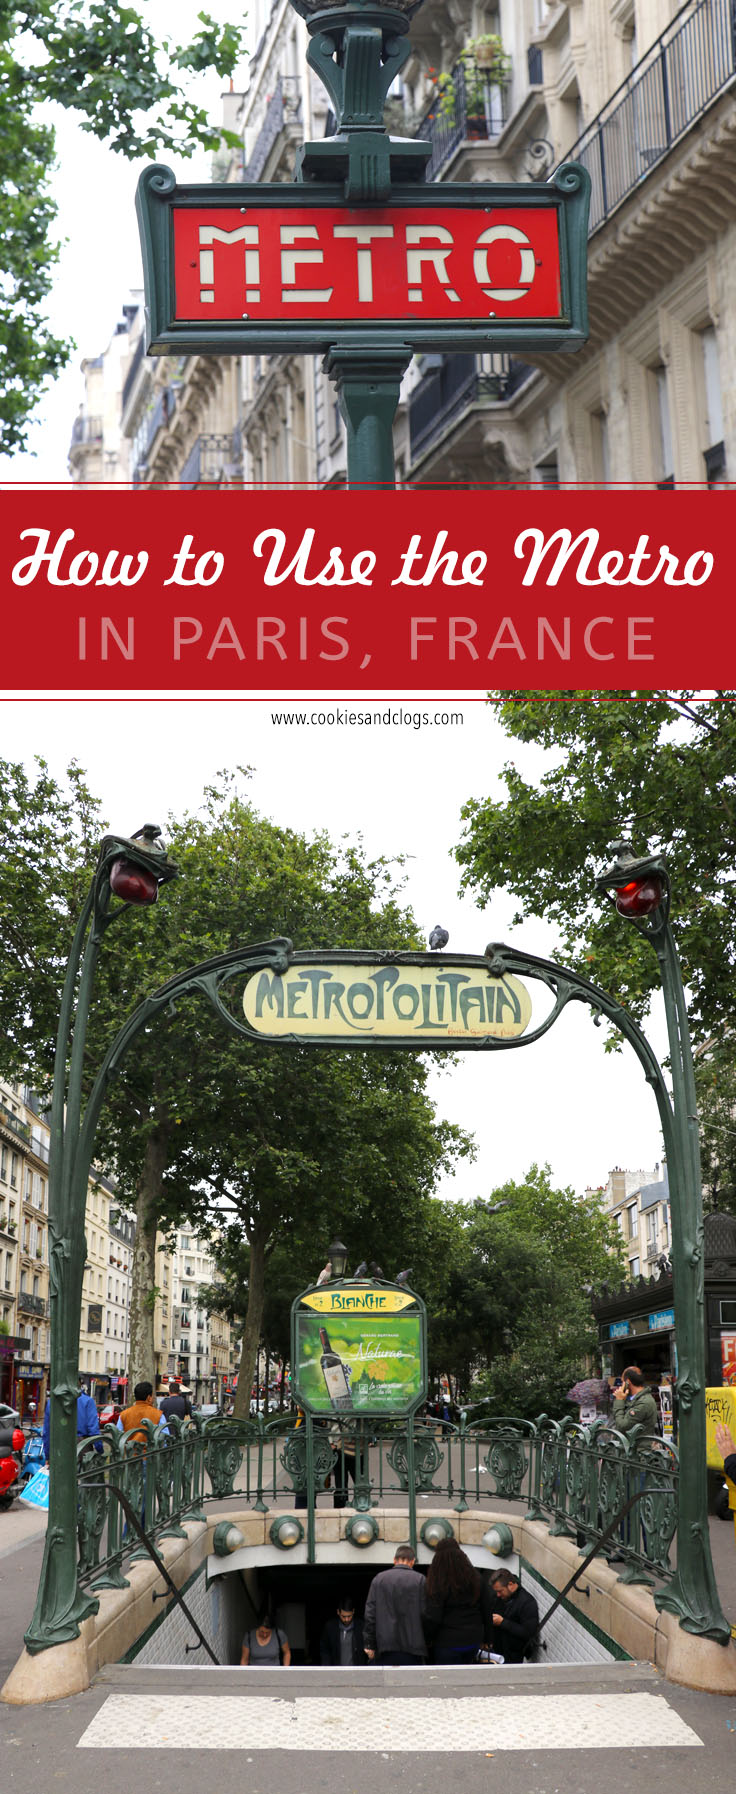 Paris Travel Guide: How to use Paris Metro & bus public transportation in Paris France w/ photos and video tutorial of how to buy tickets.